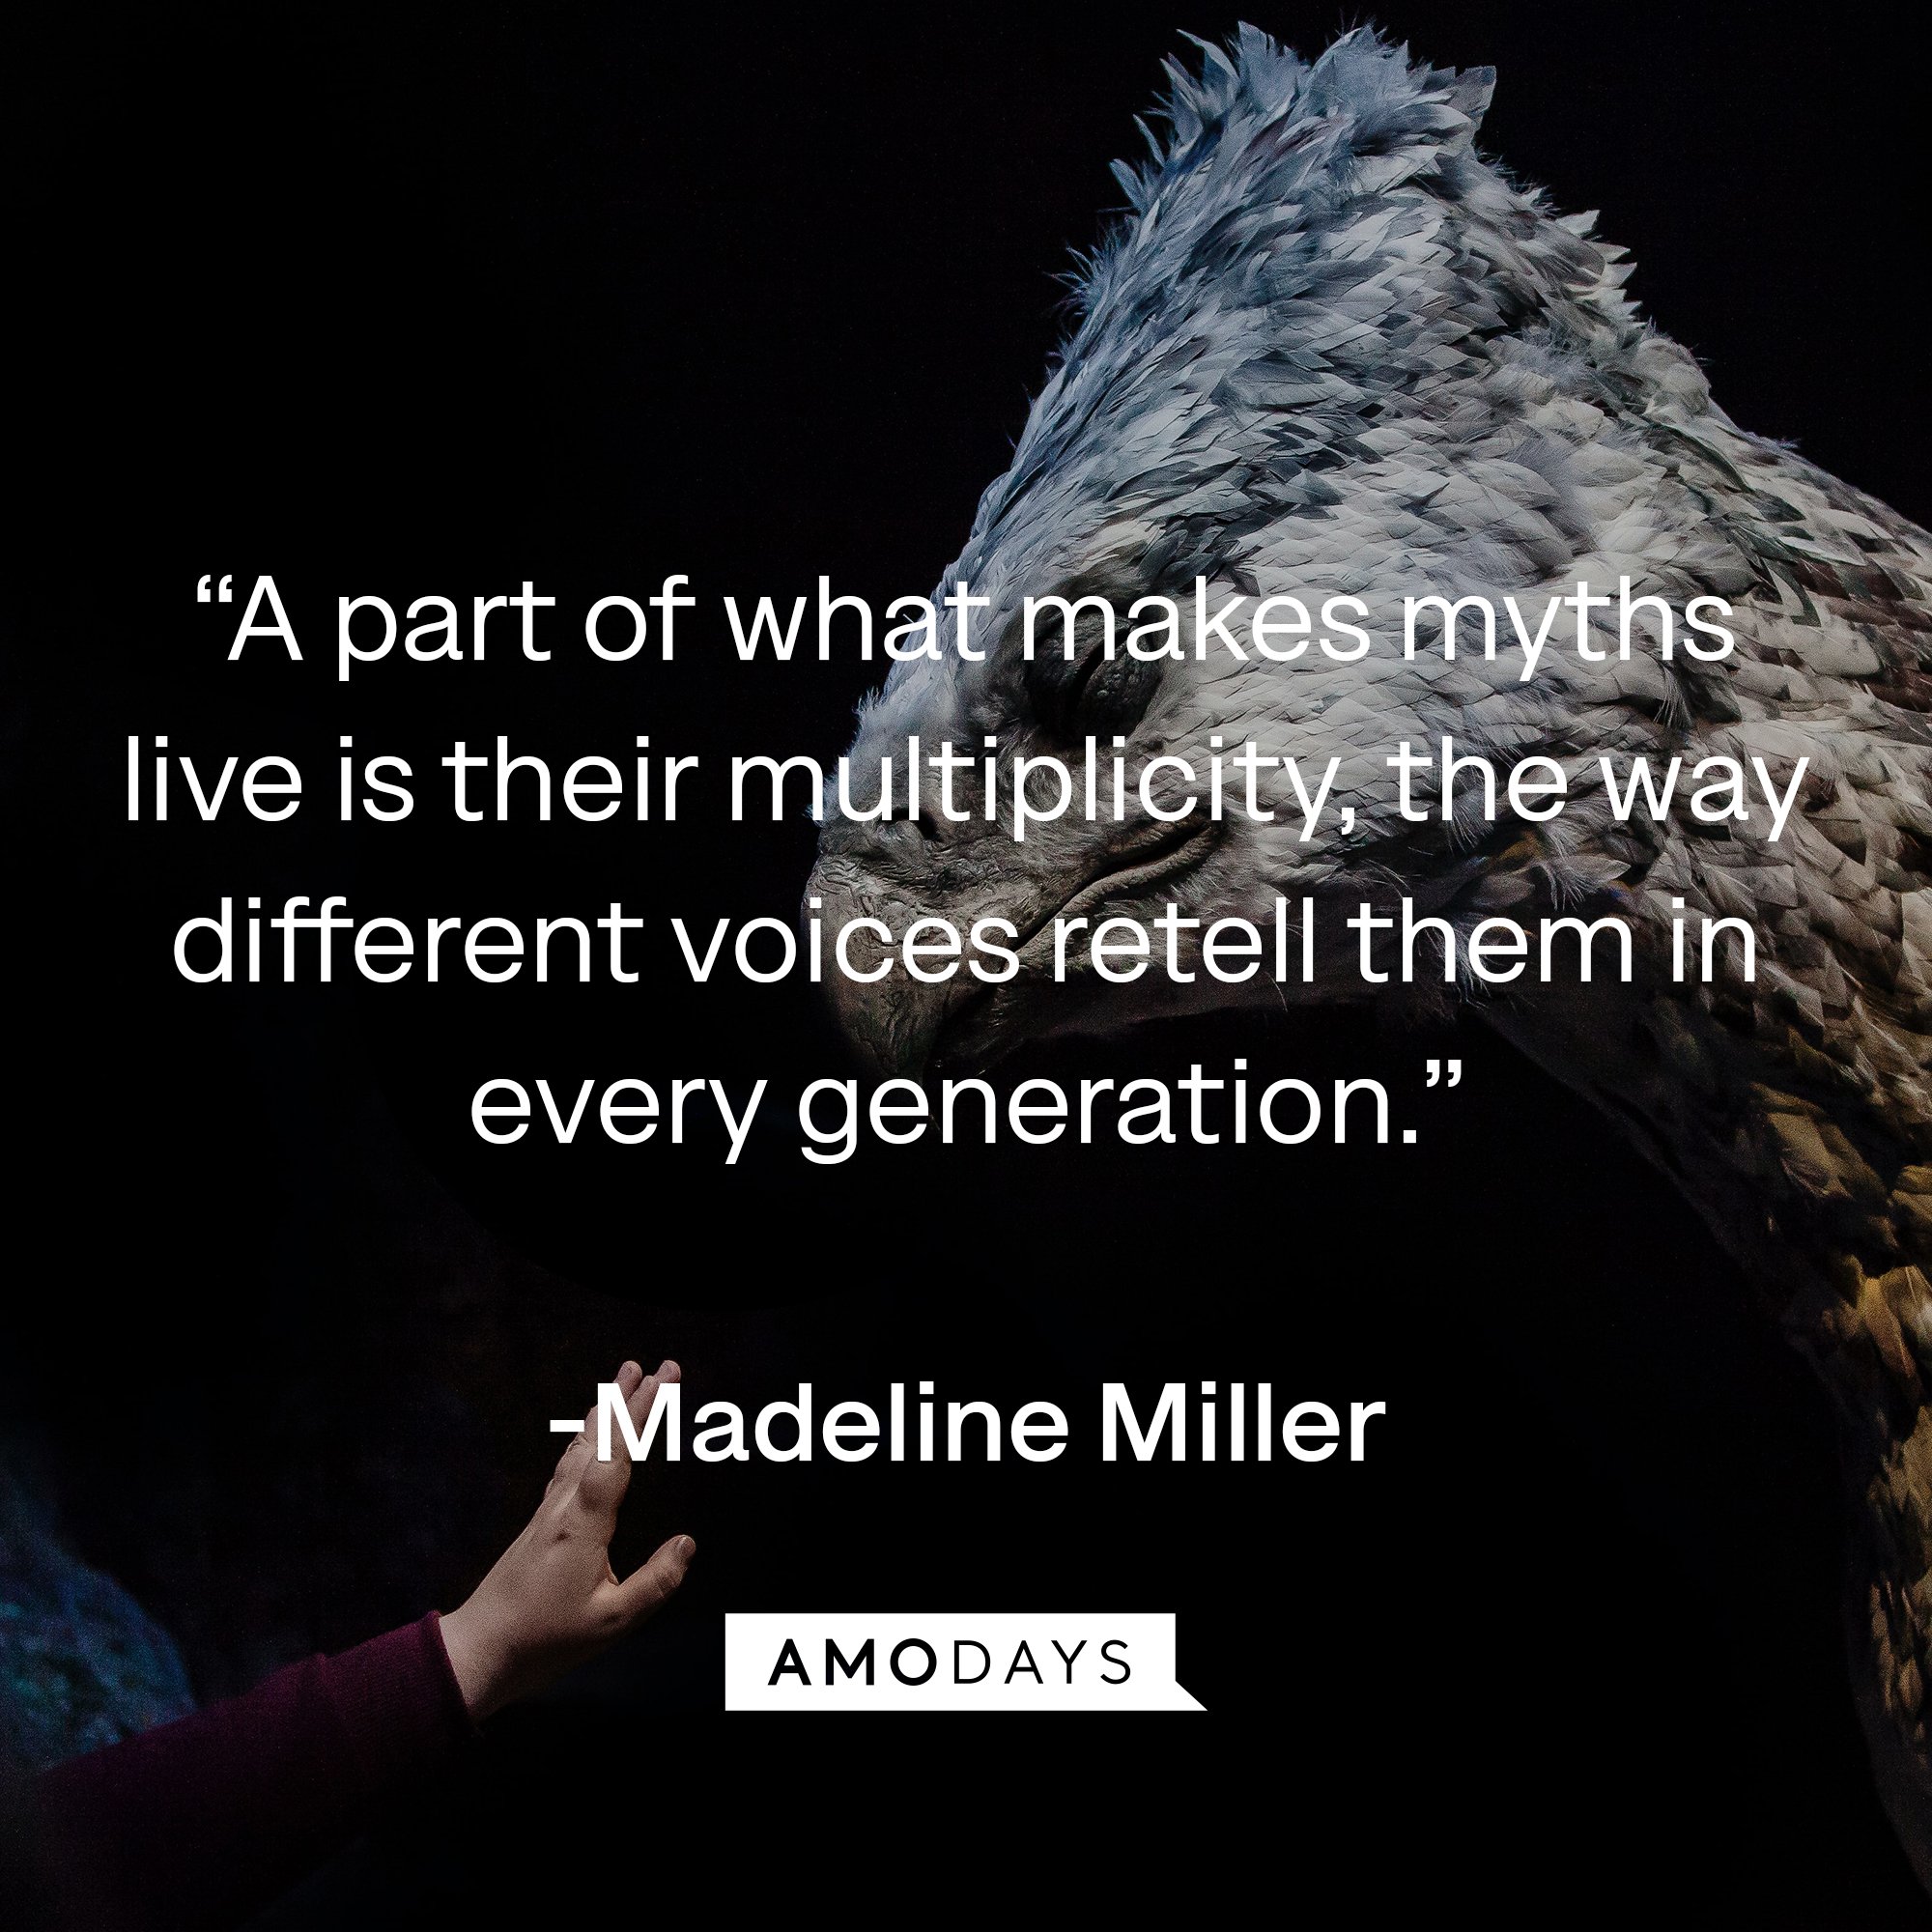 Madeline Miller's quote: “A part of what makes myths live is their multiplicity, the way different voices retell them in every generation.” | Image: AmoDays